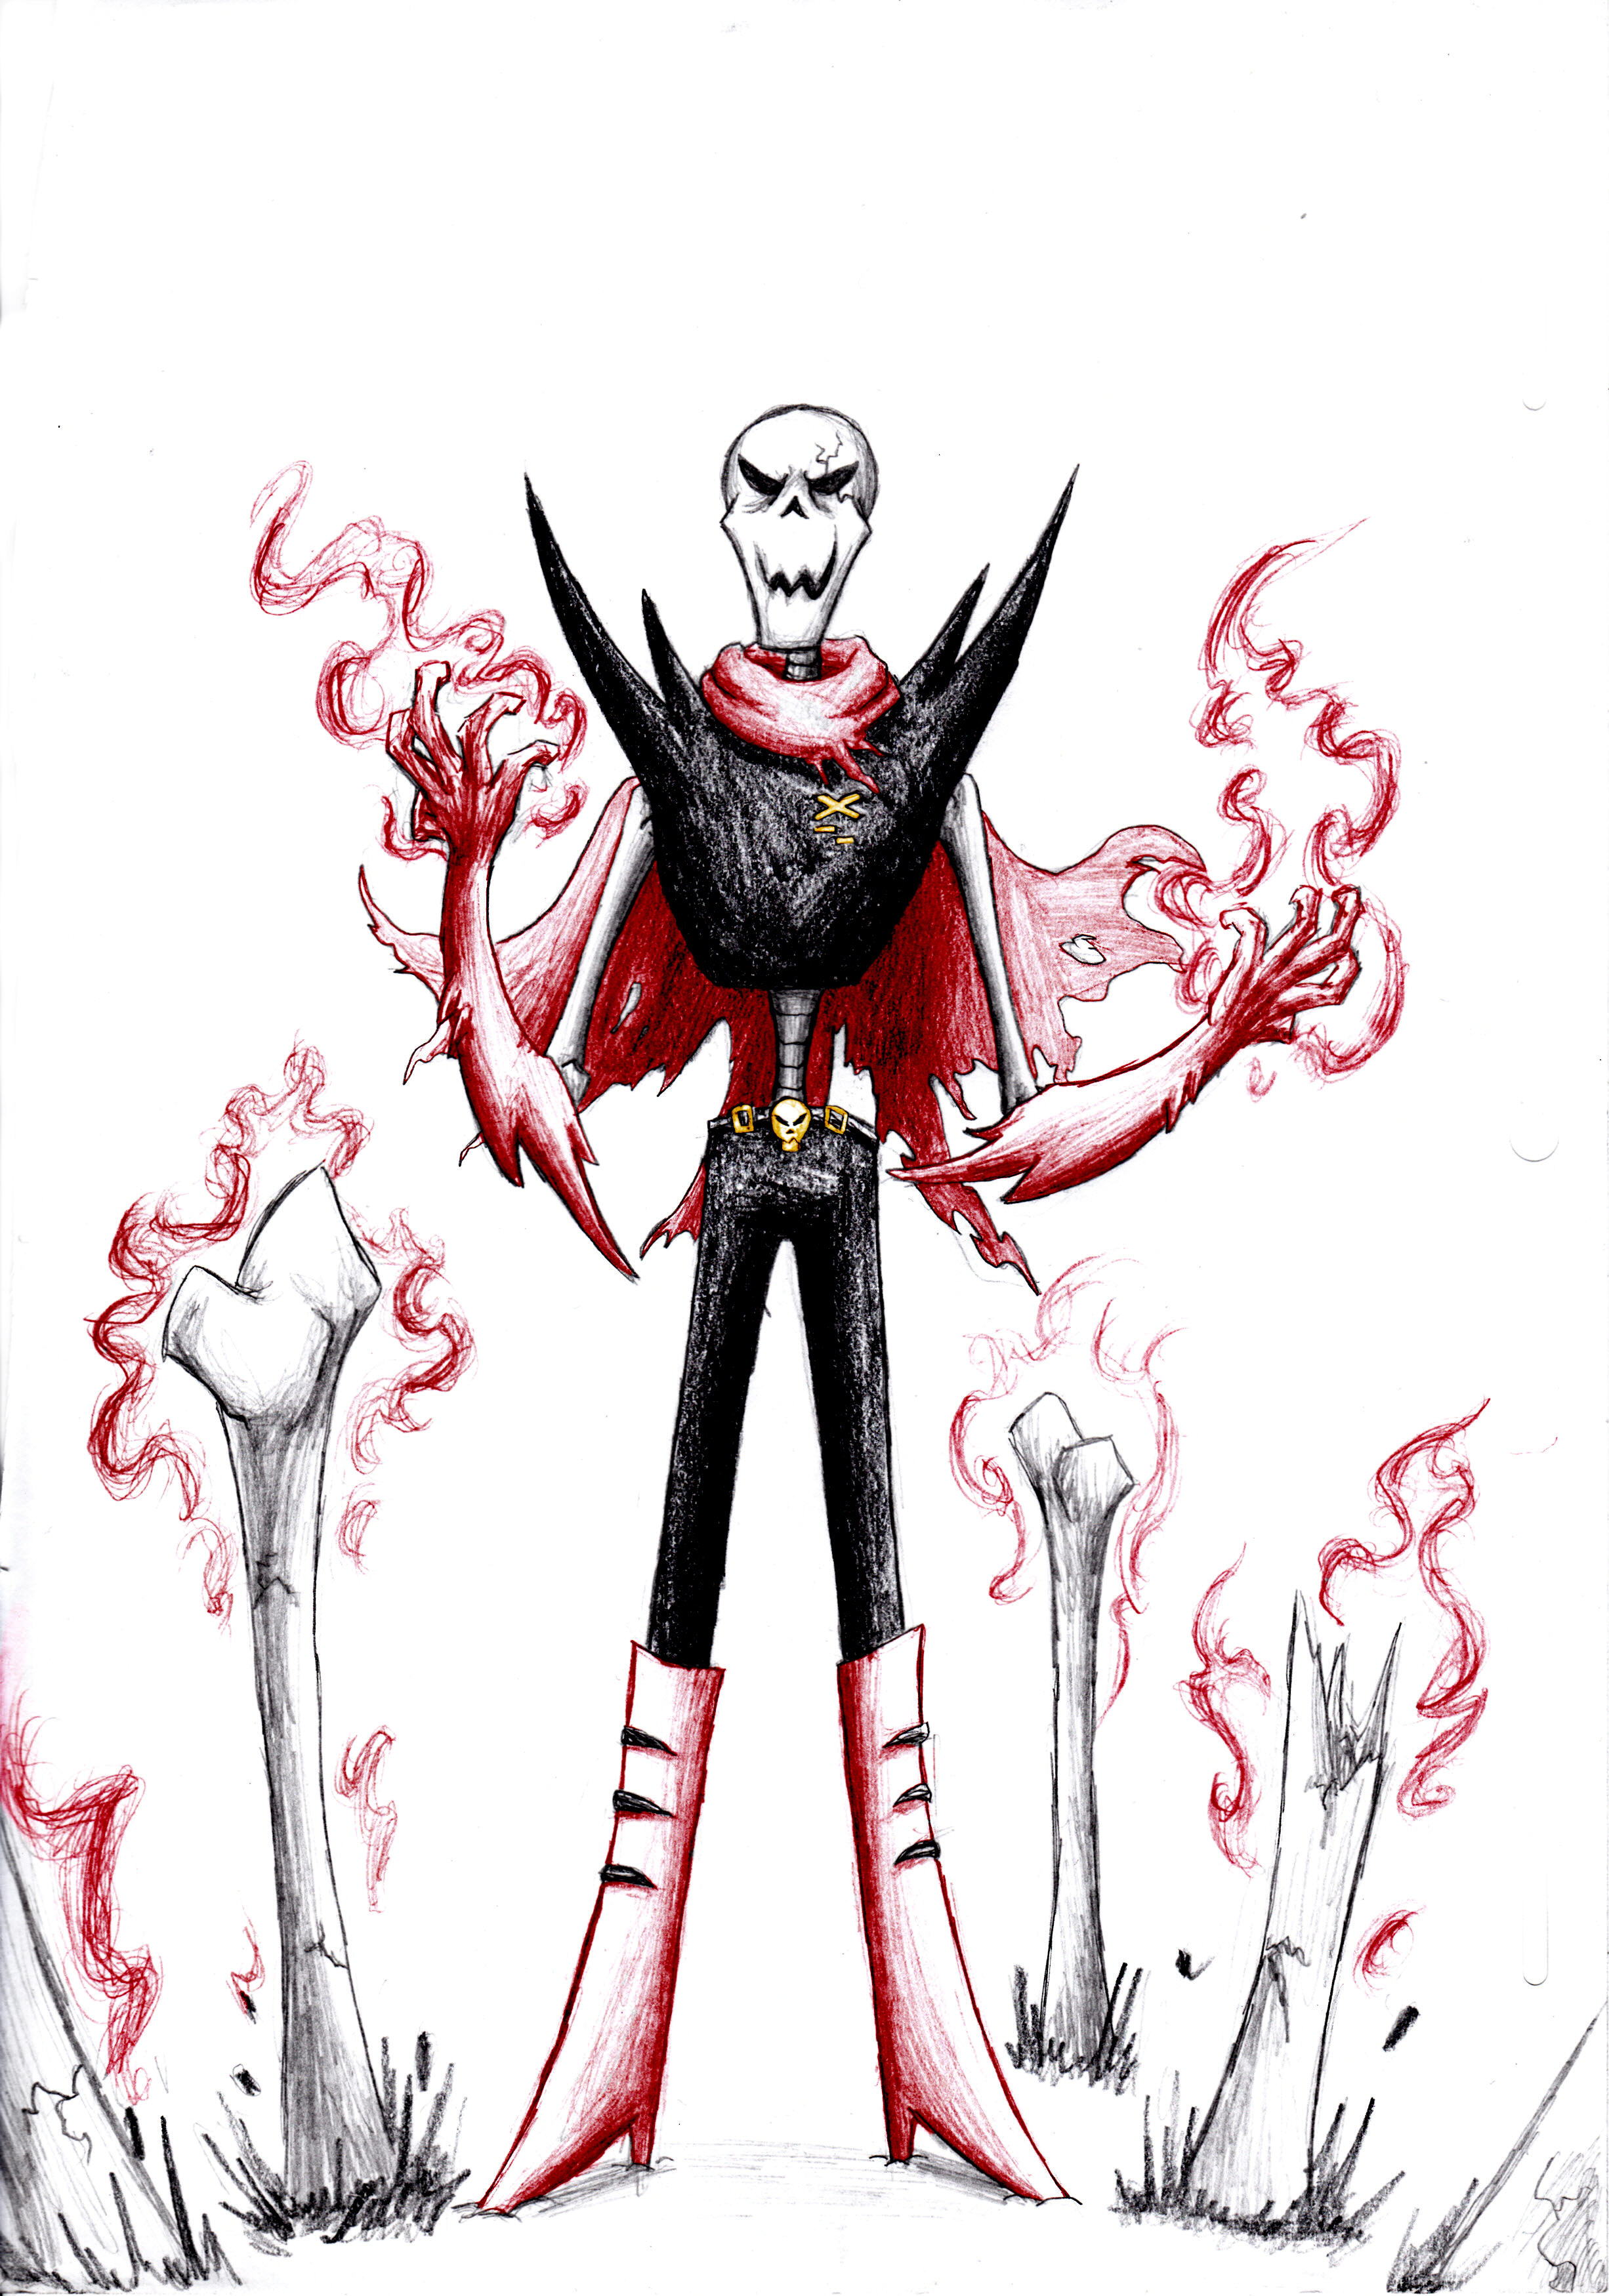 Underfell Papyrus by Crystalitar on DeviantArt